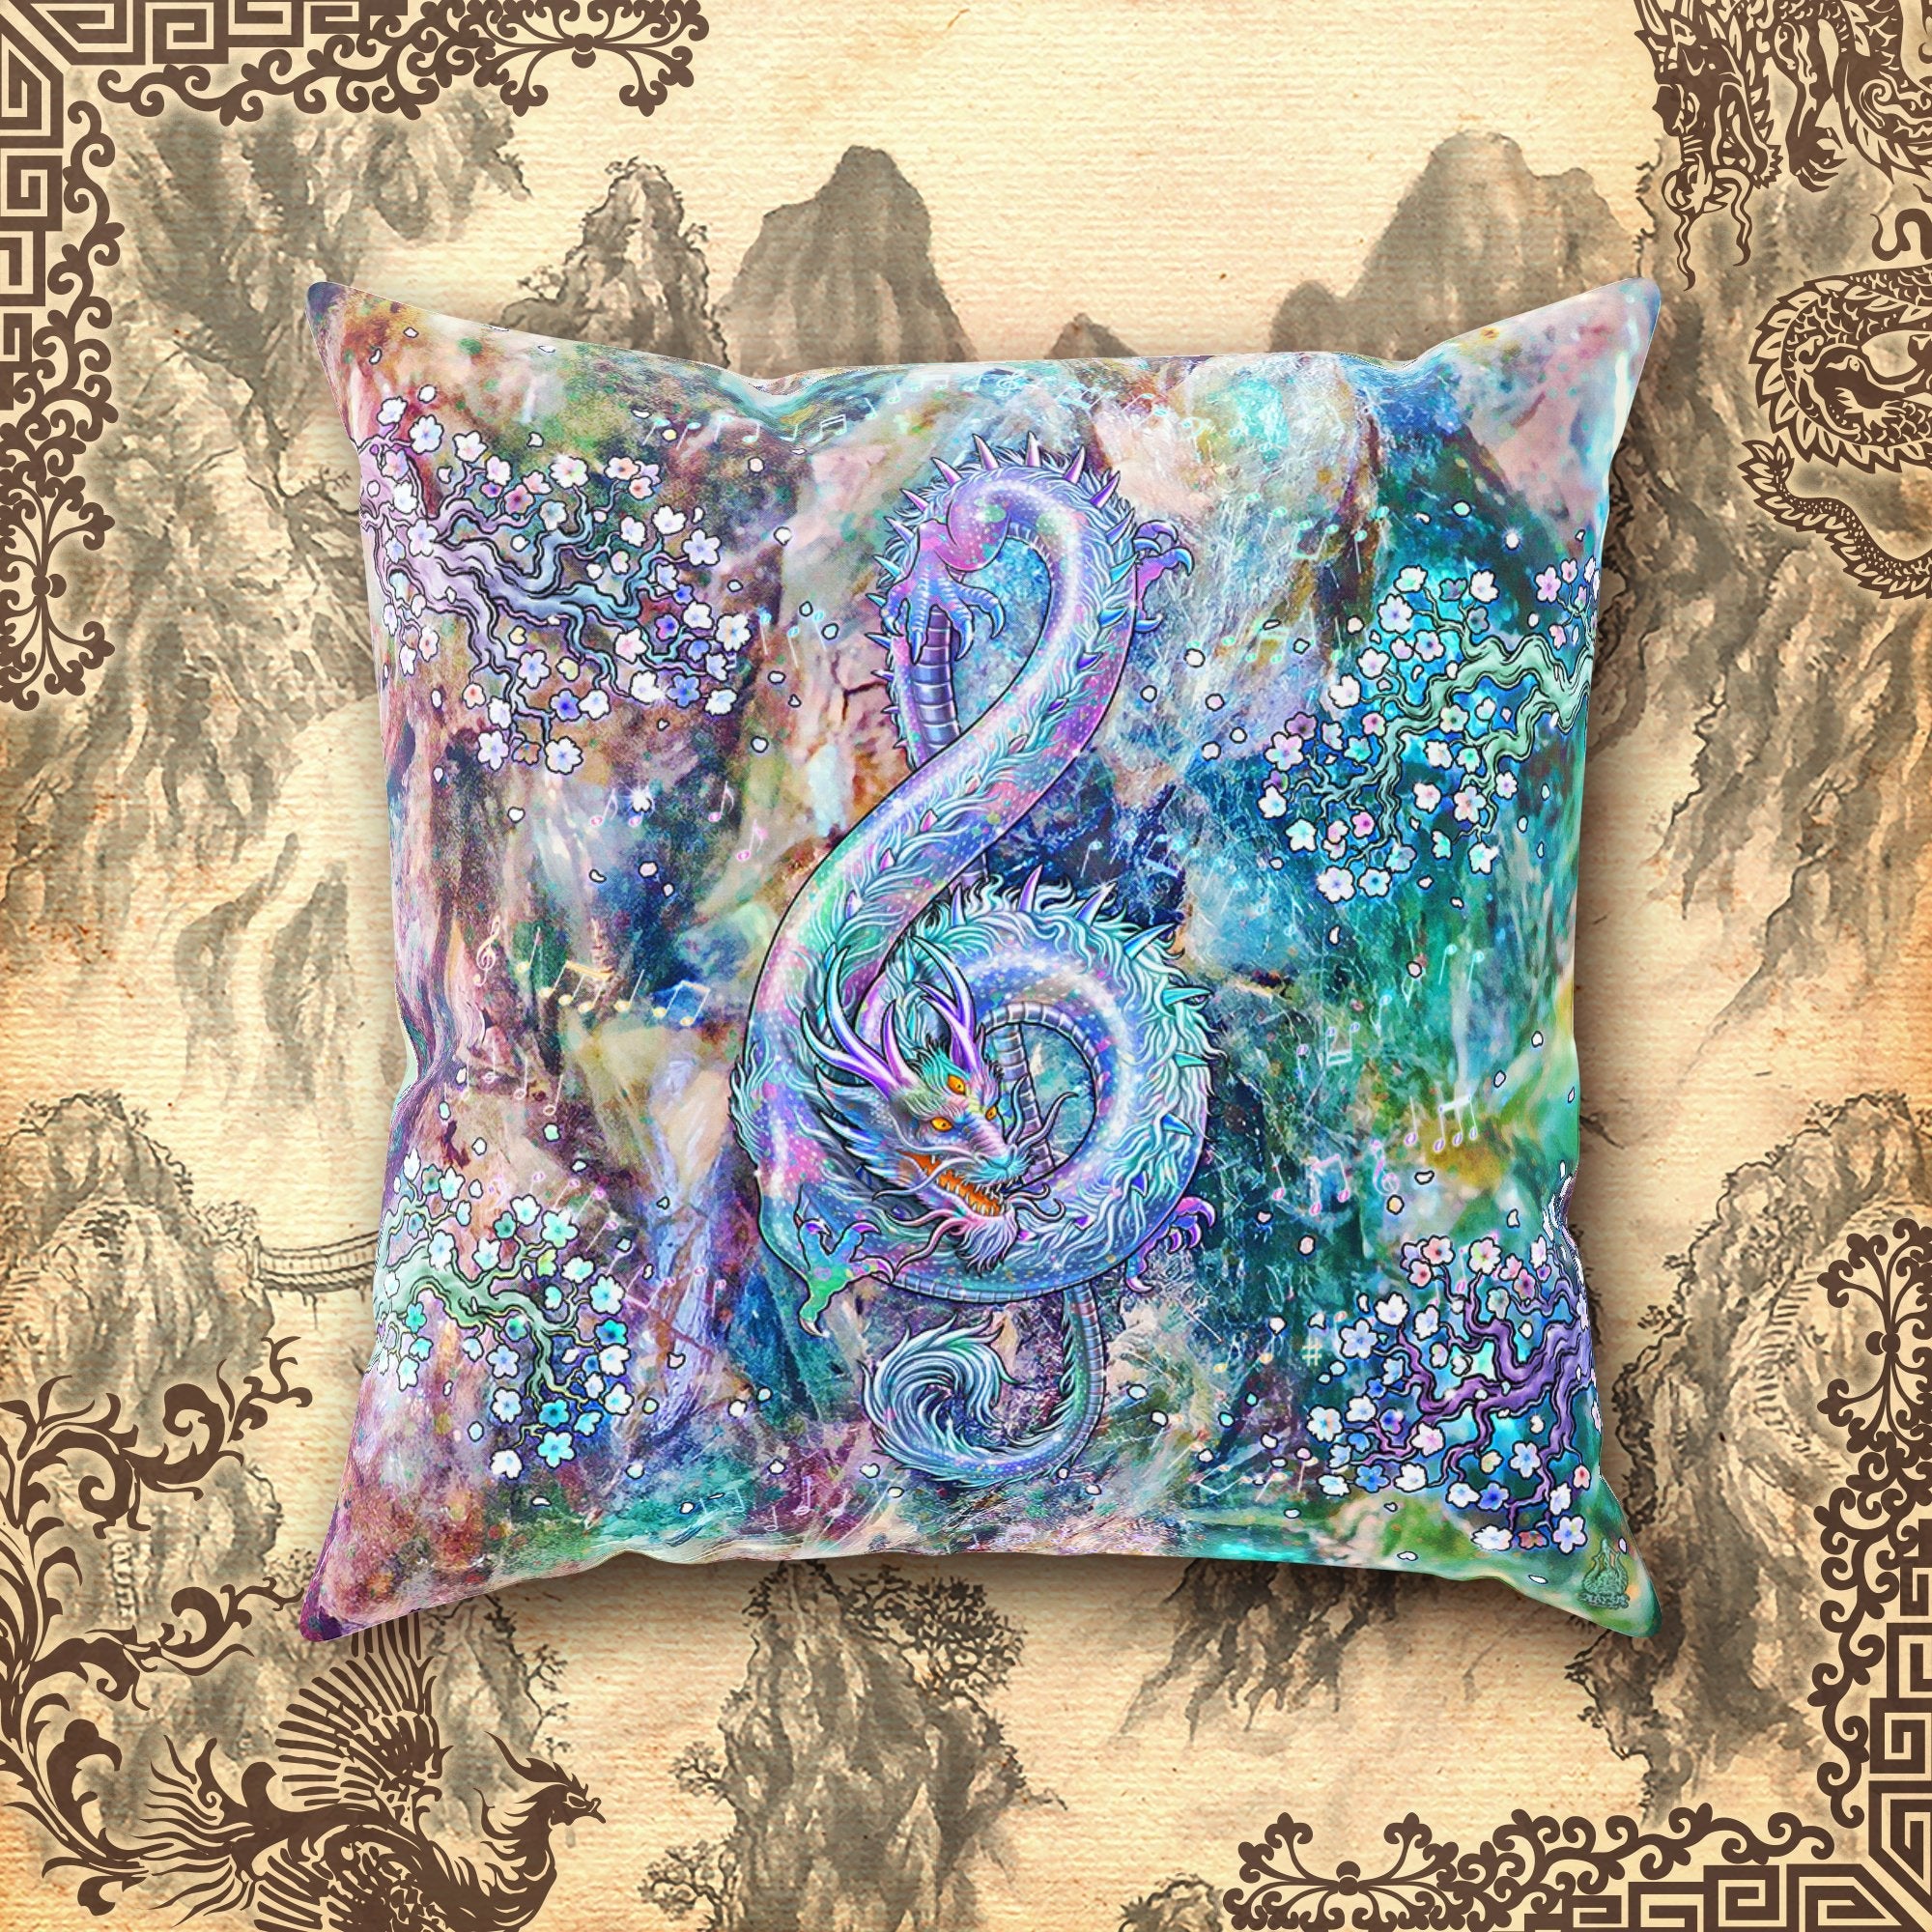 Indie Throw Pillow, Decorative Accent Cushion, Eclectic Design, Music Room Decor - Treble Clef Dragon, Gemstone, Opal - Abysm Internal